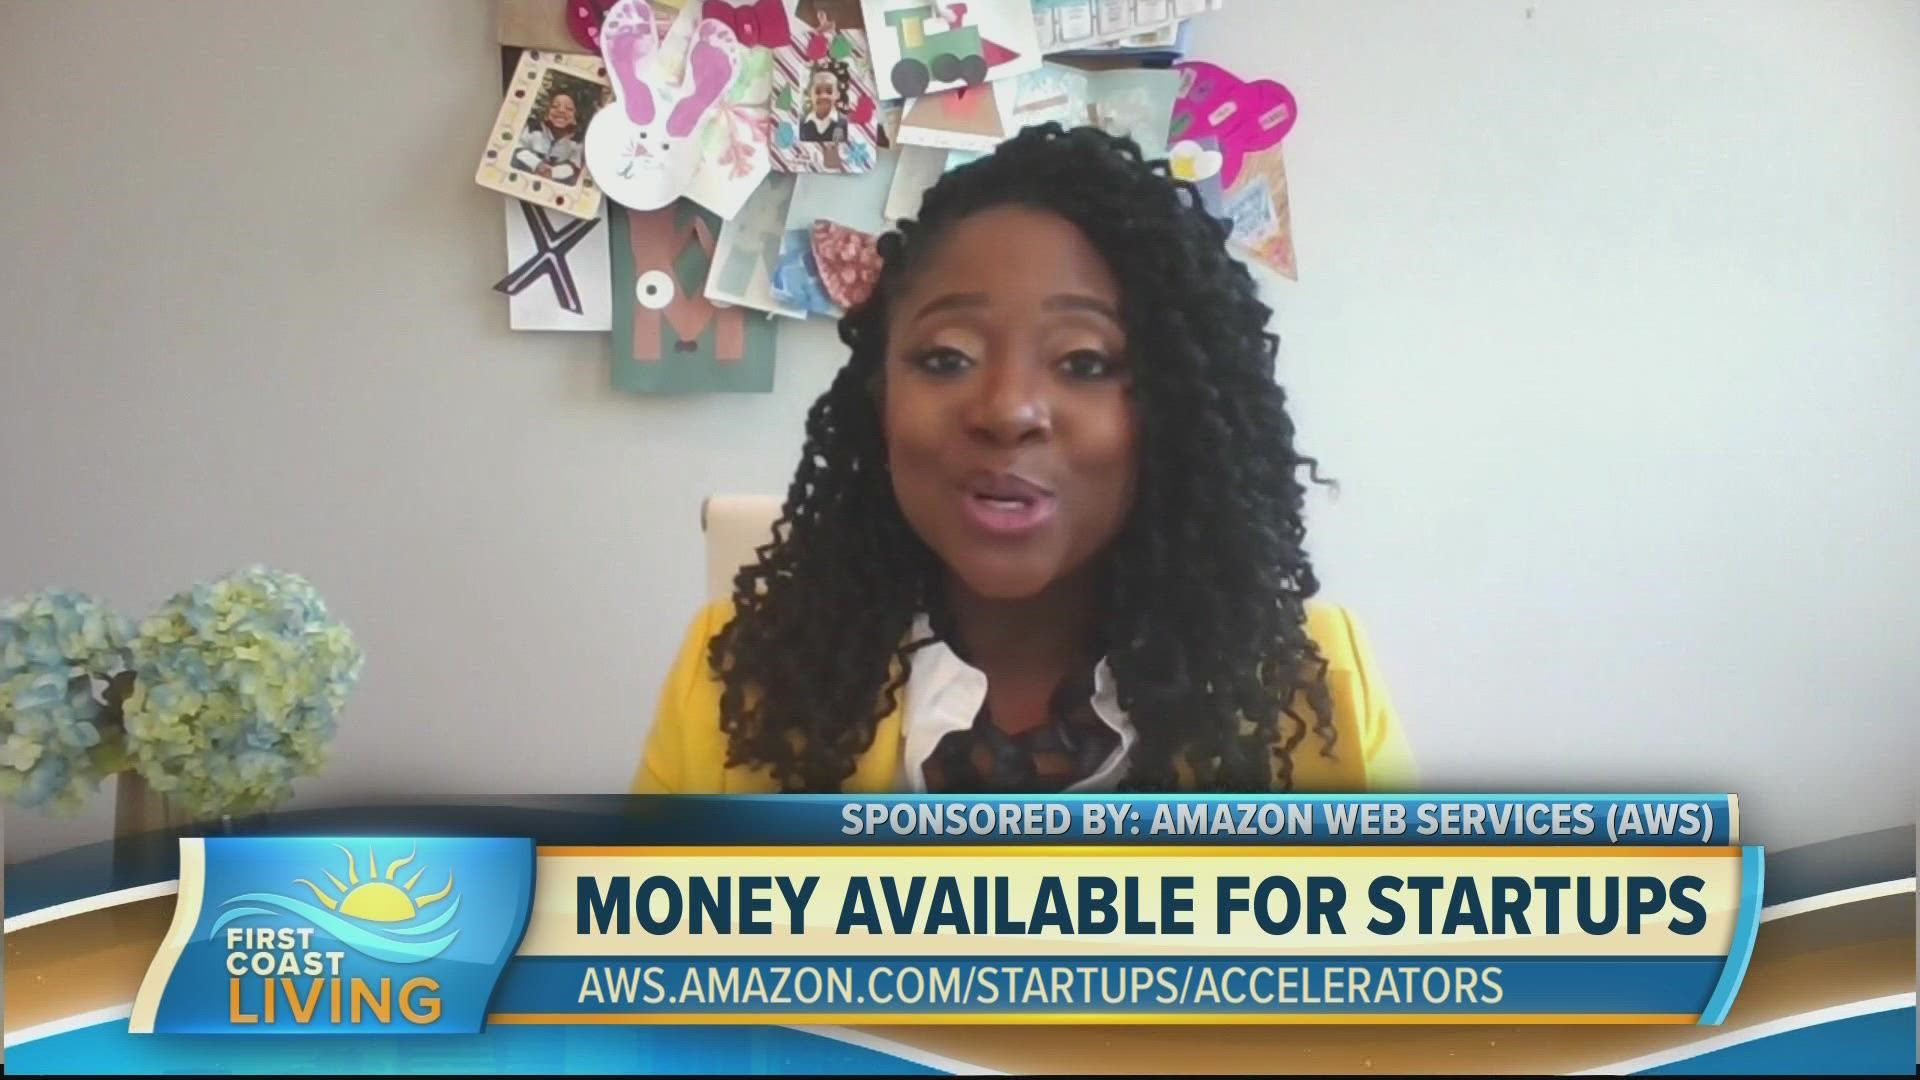 Each startup receives $125,000 cash, up to $100,000 in AWS Activate credits, business and technical guidance, a peer community, and ongoing support.